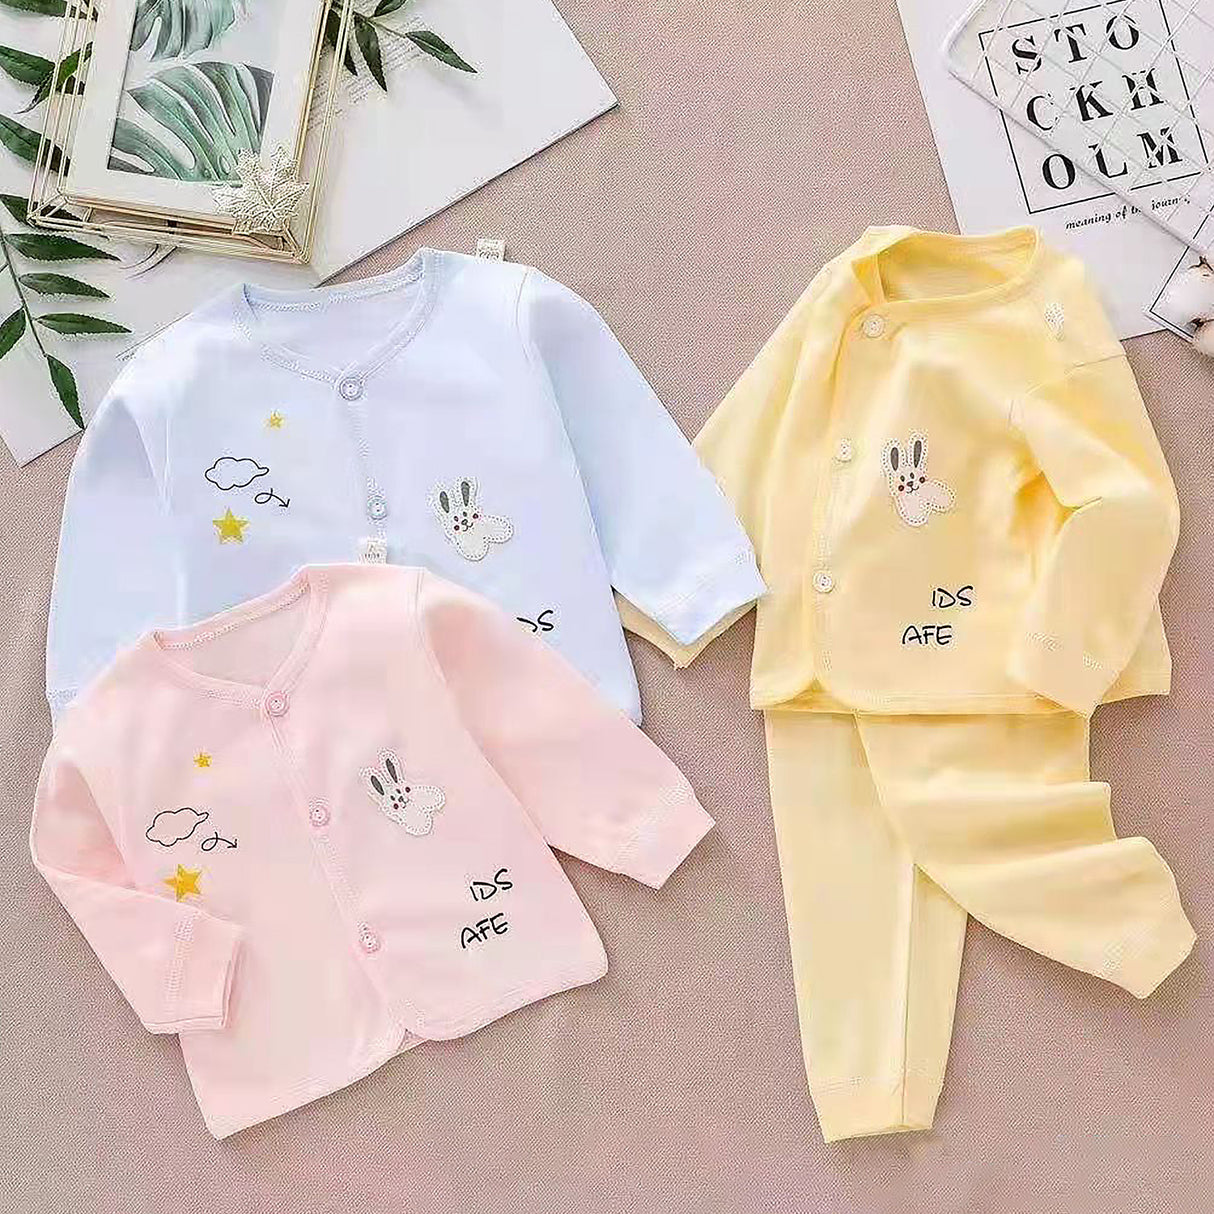 Star Full Sleeves Top And Pyjama Buttoned Cotton Night Suit